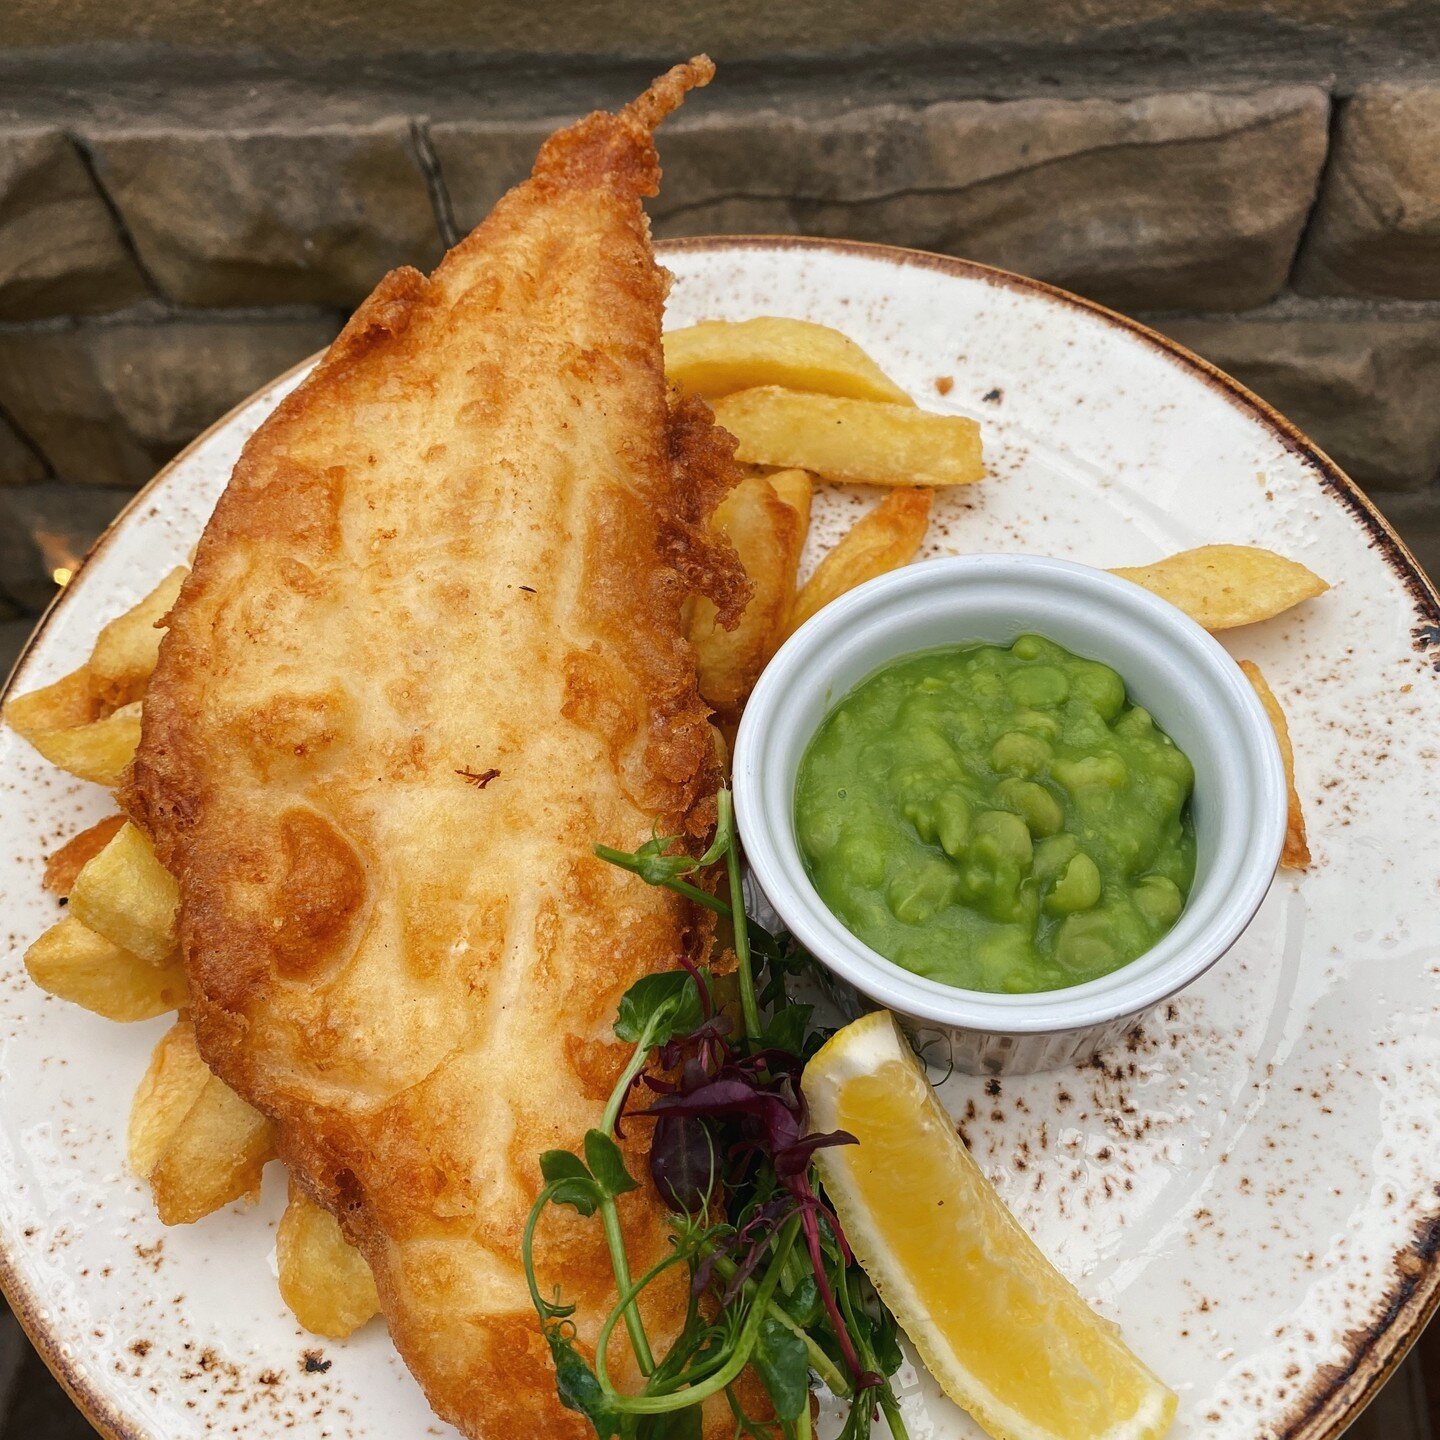 ғɪsʜ &amp; ᴄʜɪᴘ ғʀɪᴅᴀʏs. ⁠
⁠
Nothing beats a hearty portion of fish &amp; chips - especially on a Friday! ⁠
⁠
Join us at The Applestore Cafe for one of our home-cooked classics. ⁠
.⁠
.⁠
.⁠
.⁠
.⁠
⁠
#wyresdale #wyresdalepark #cafe #applestore #applesto